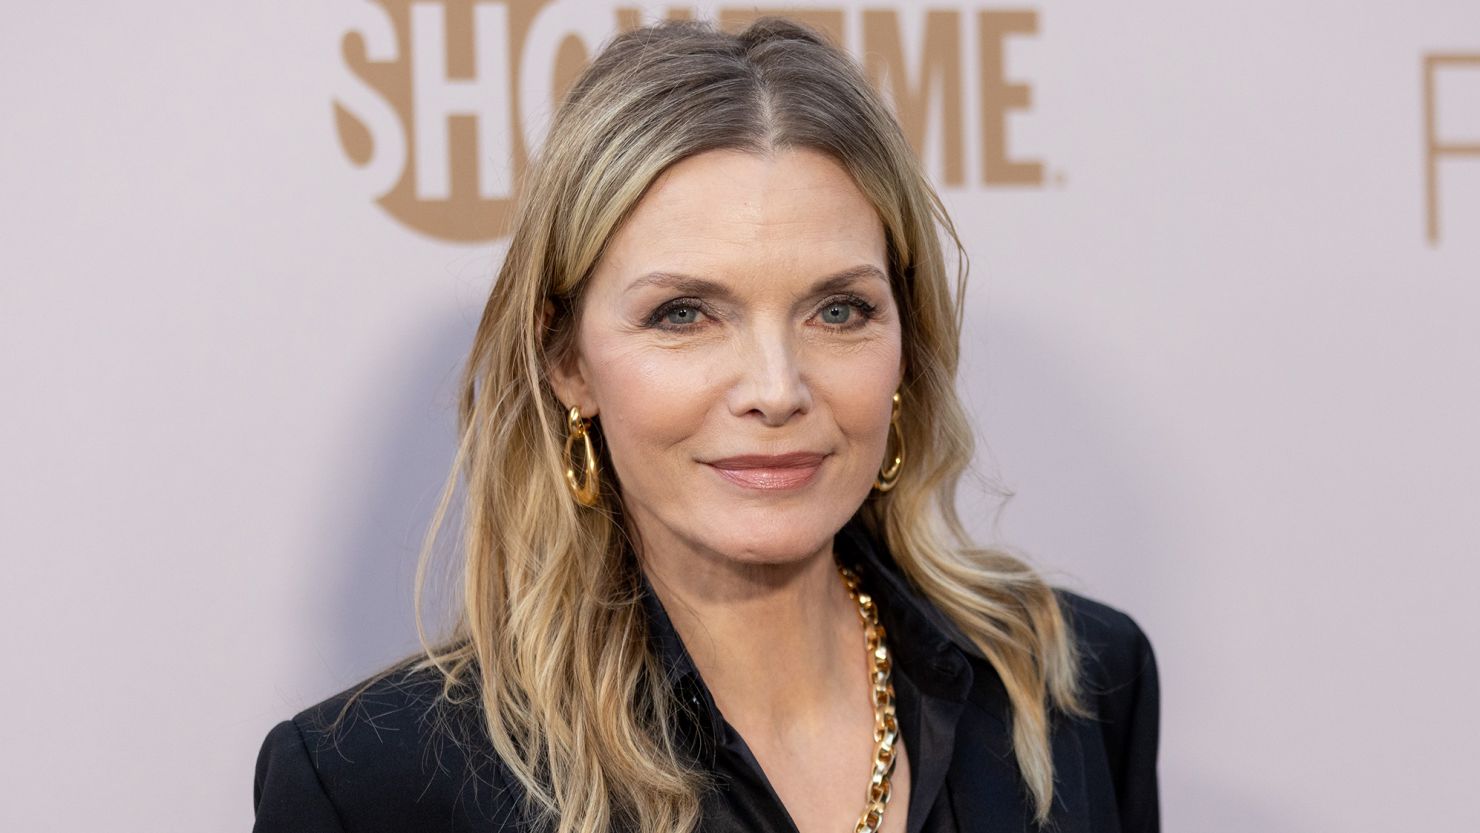 Michelle Pfeiffer arrives at Showtime's FYC event and premiere for 'The First Lady' on April 14.